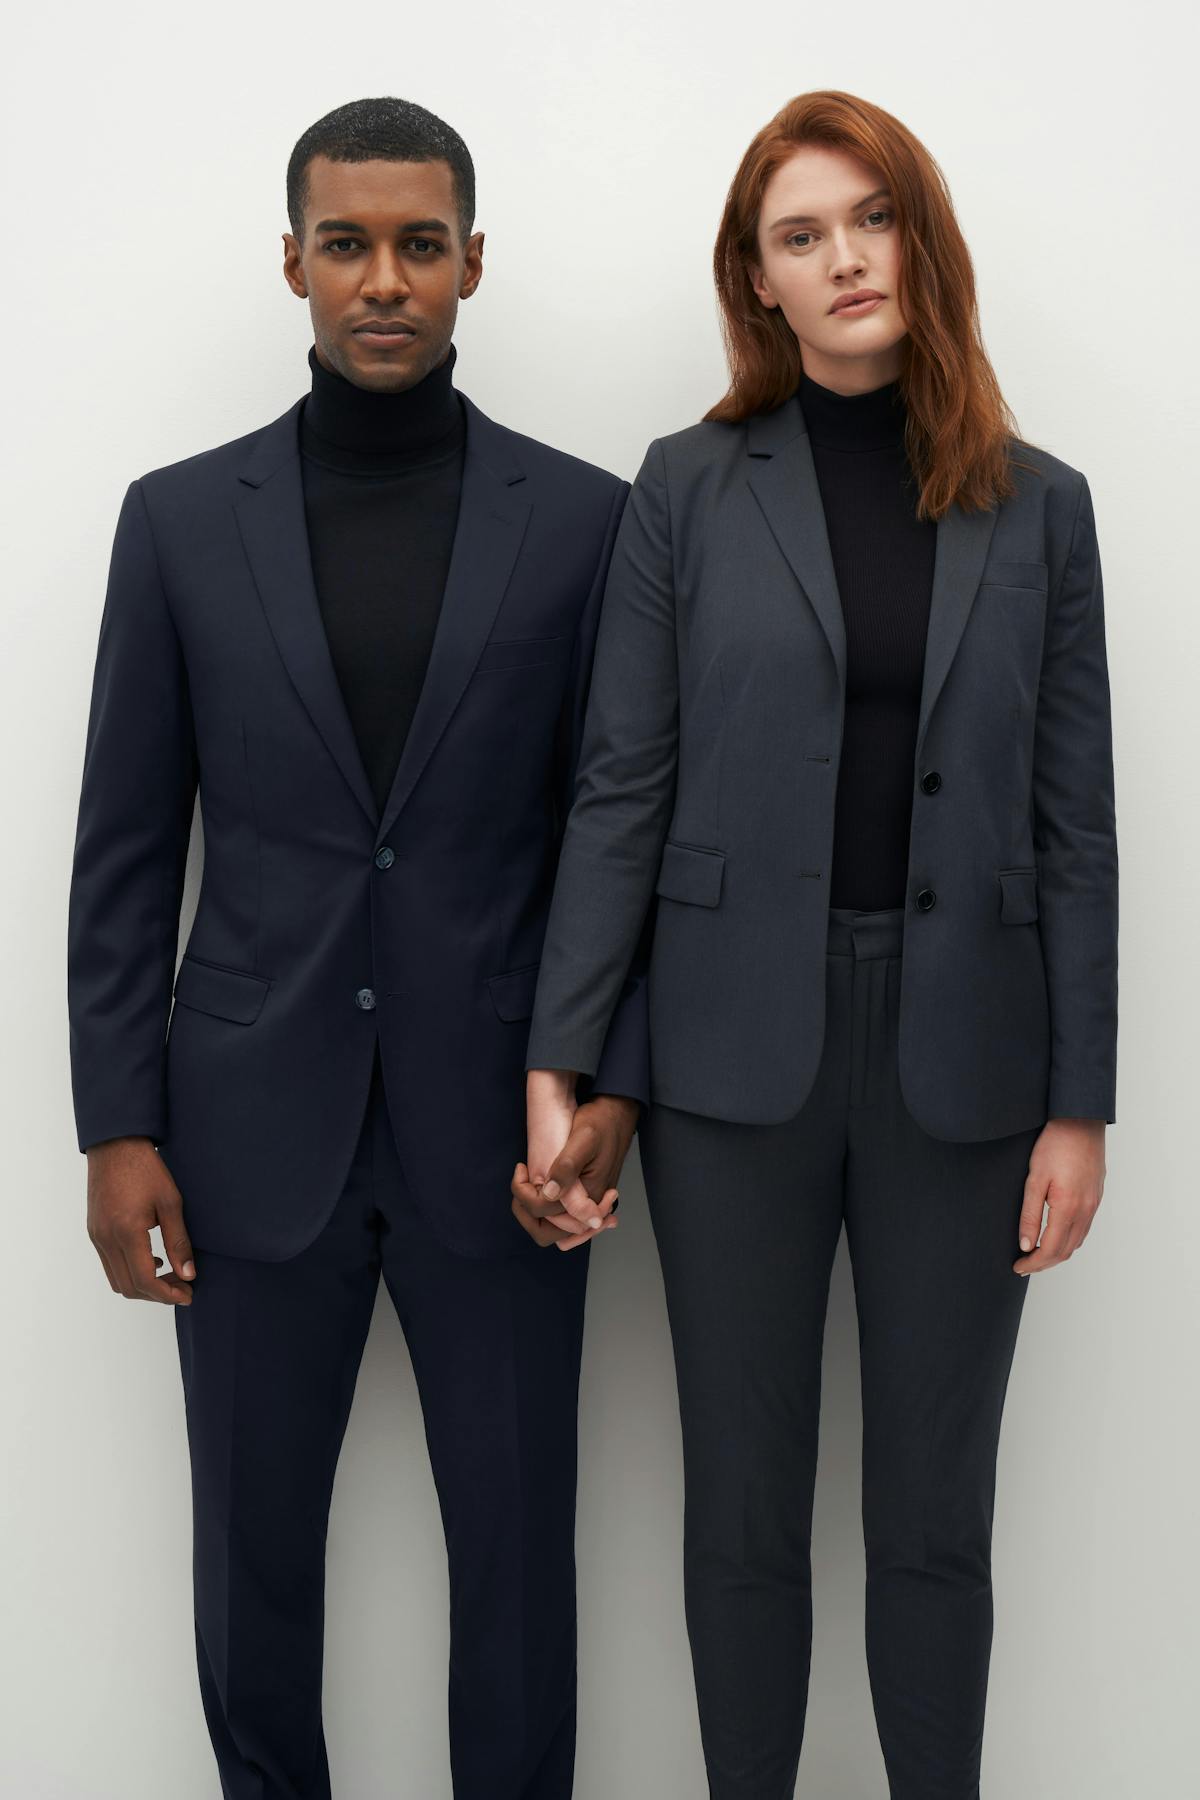 Matching men's and women's suits in dark grey with a turtleneck for professional outfits.